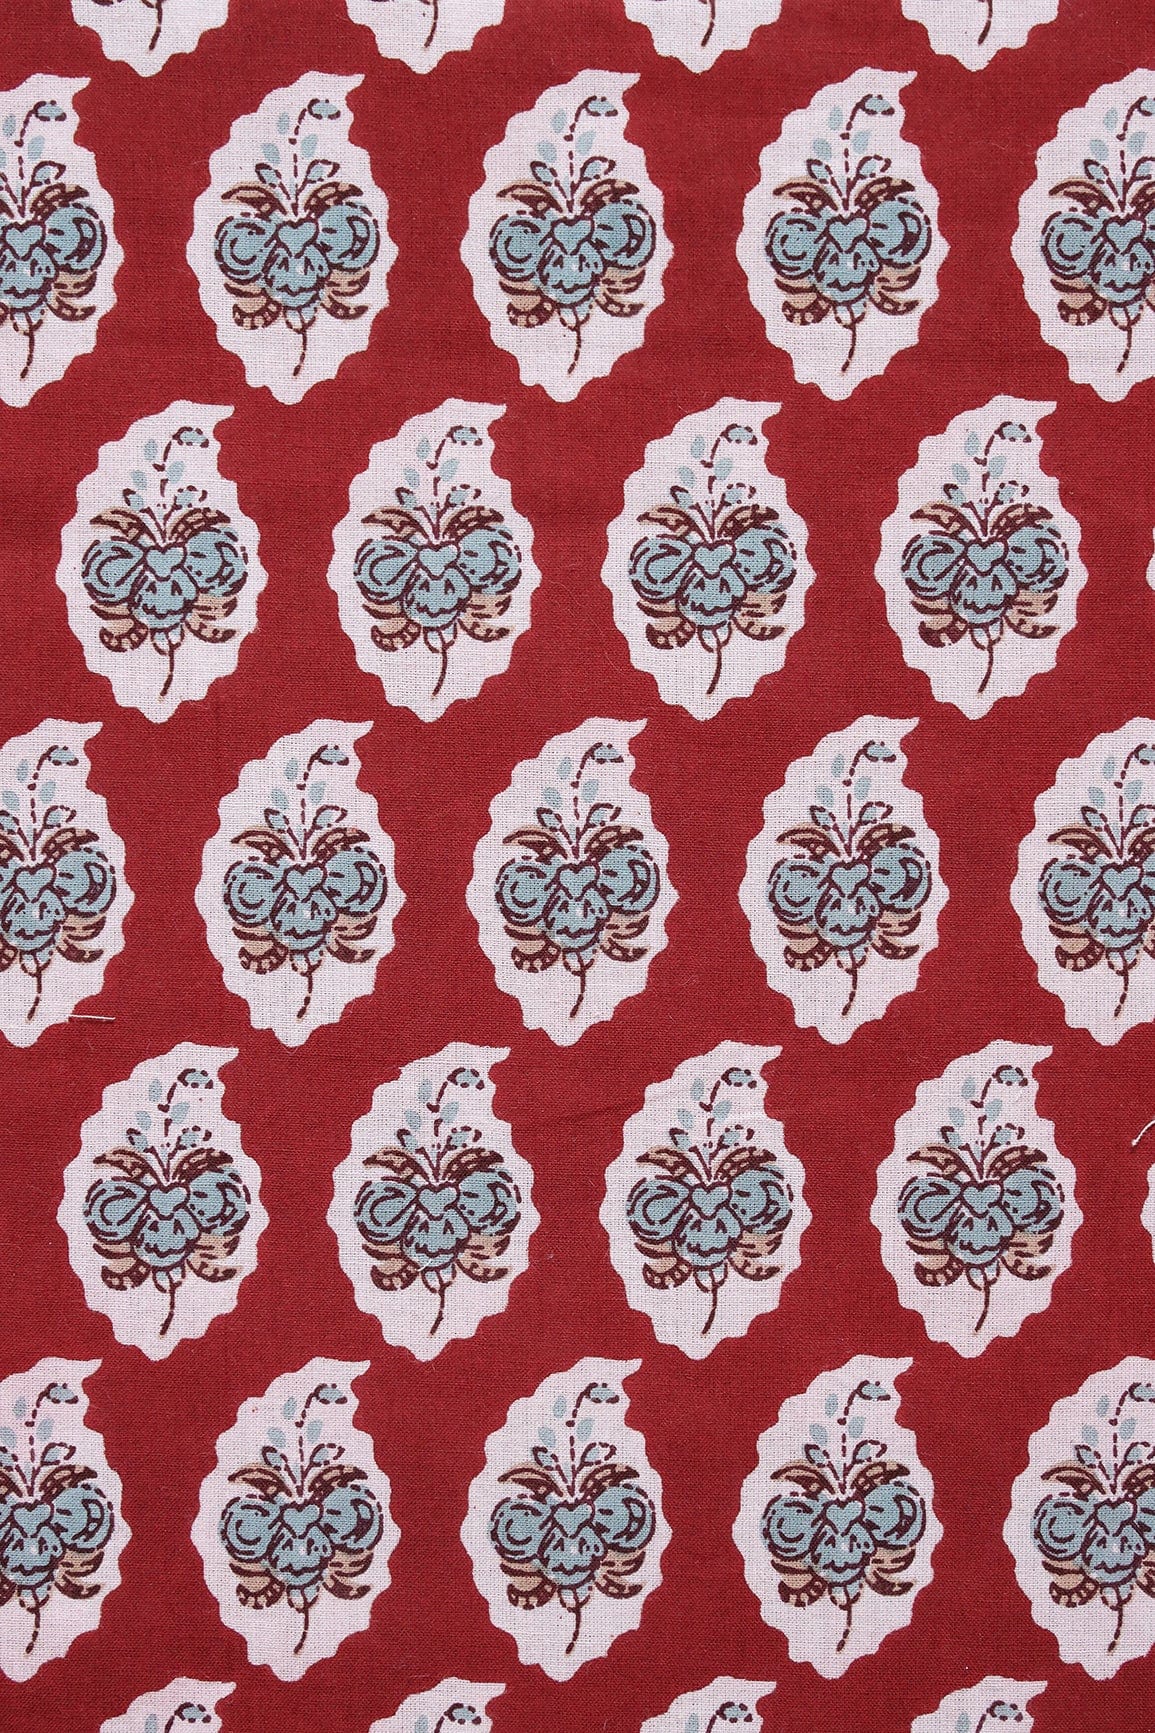 doeraa Prints Red And White Leafy Pattern Screen Print organic Cotton Fabric